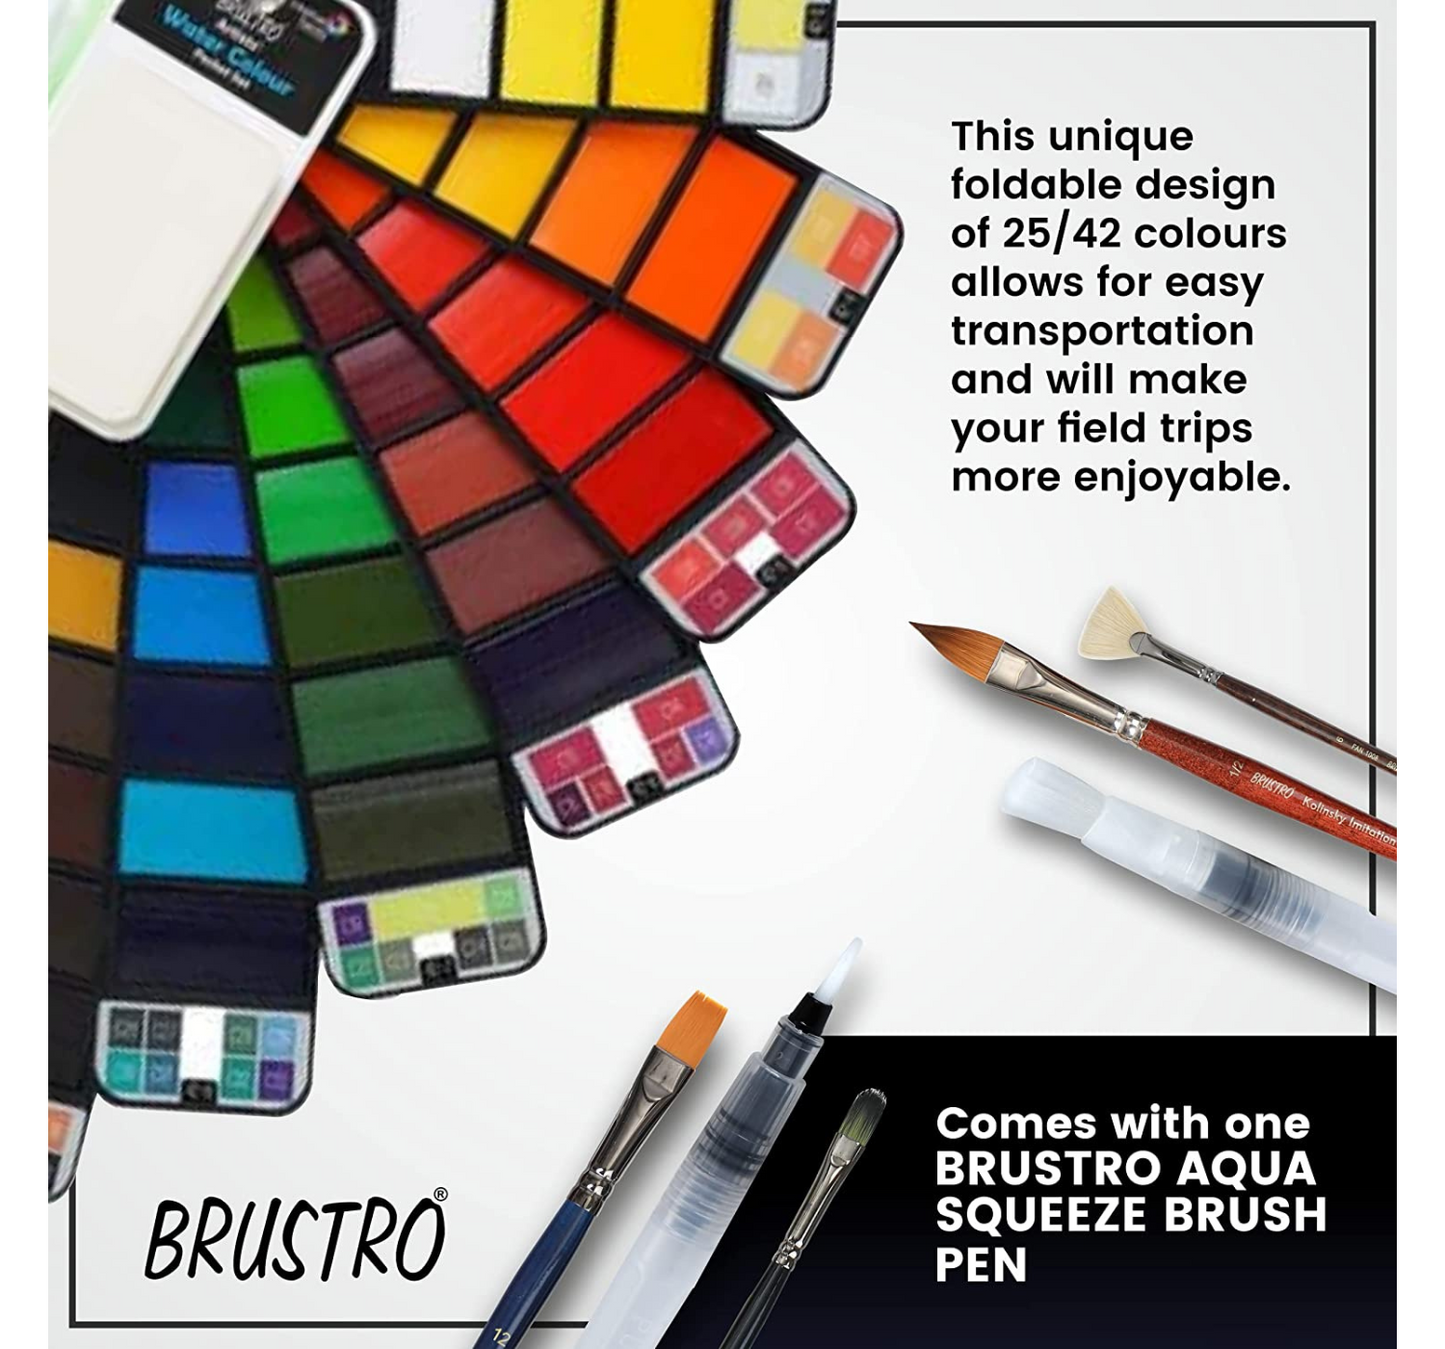 Brustro Artists ’ Watercolour Pan (Set of 42) with its Paper, 14 X 21 cm.